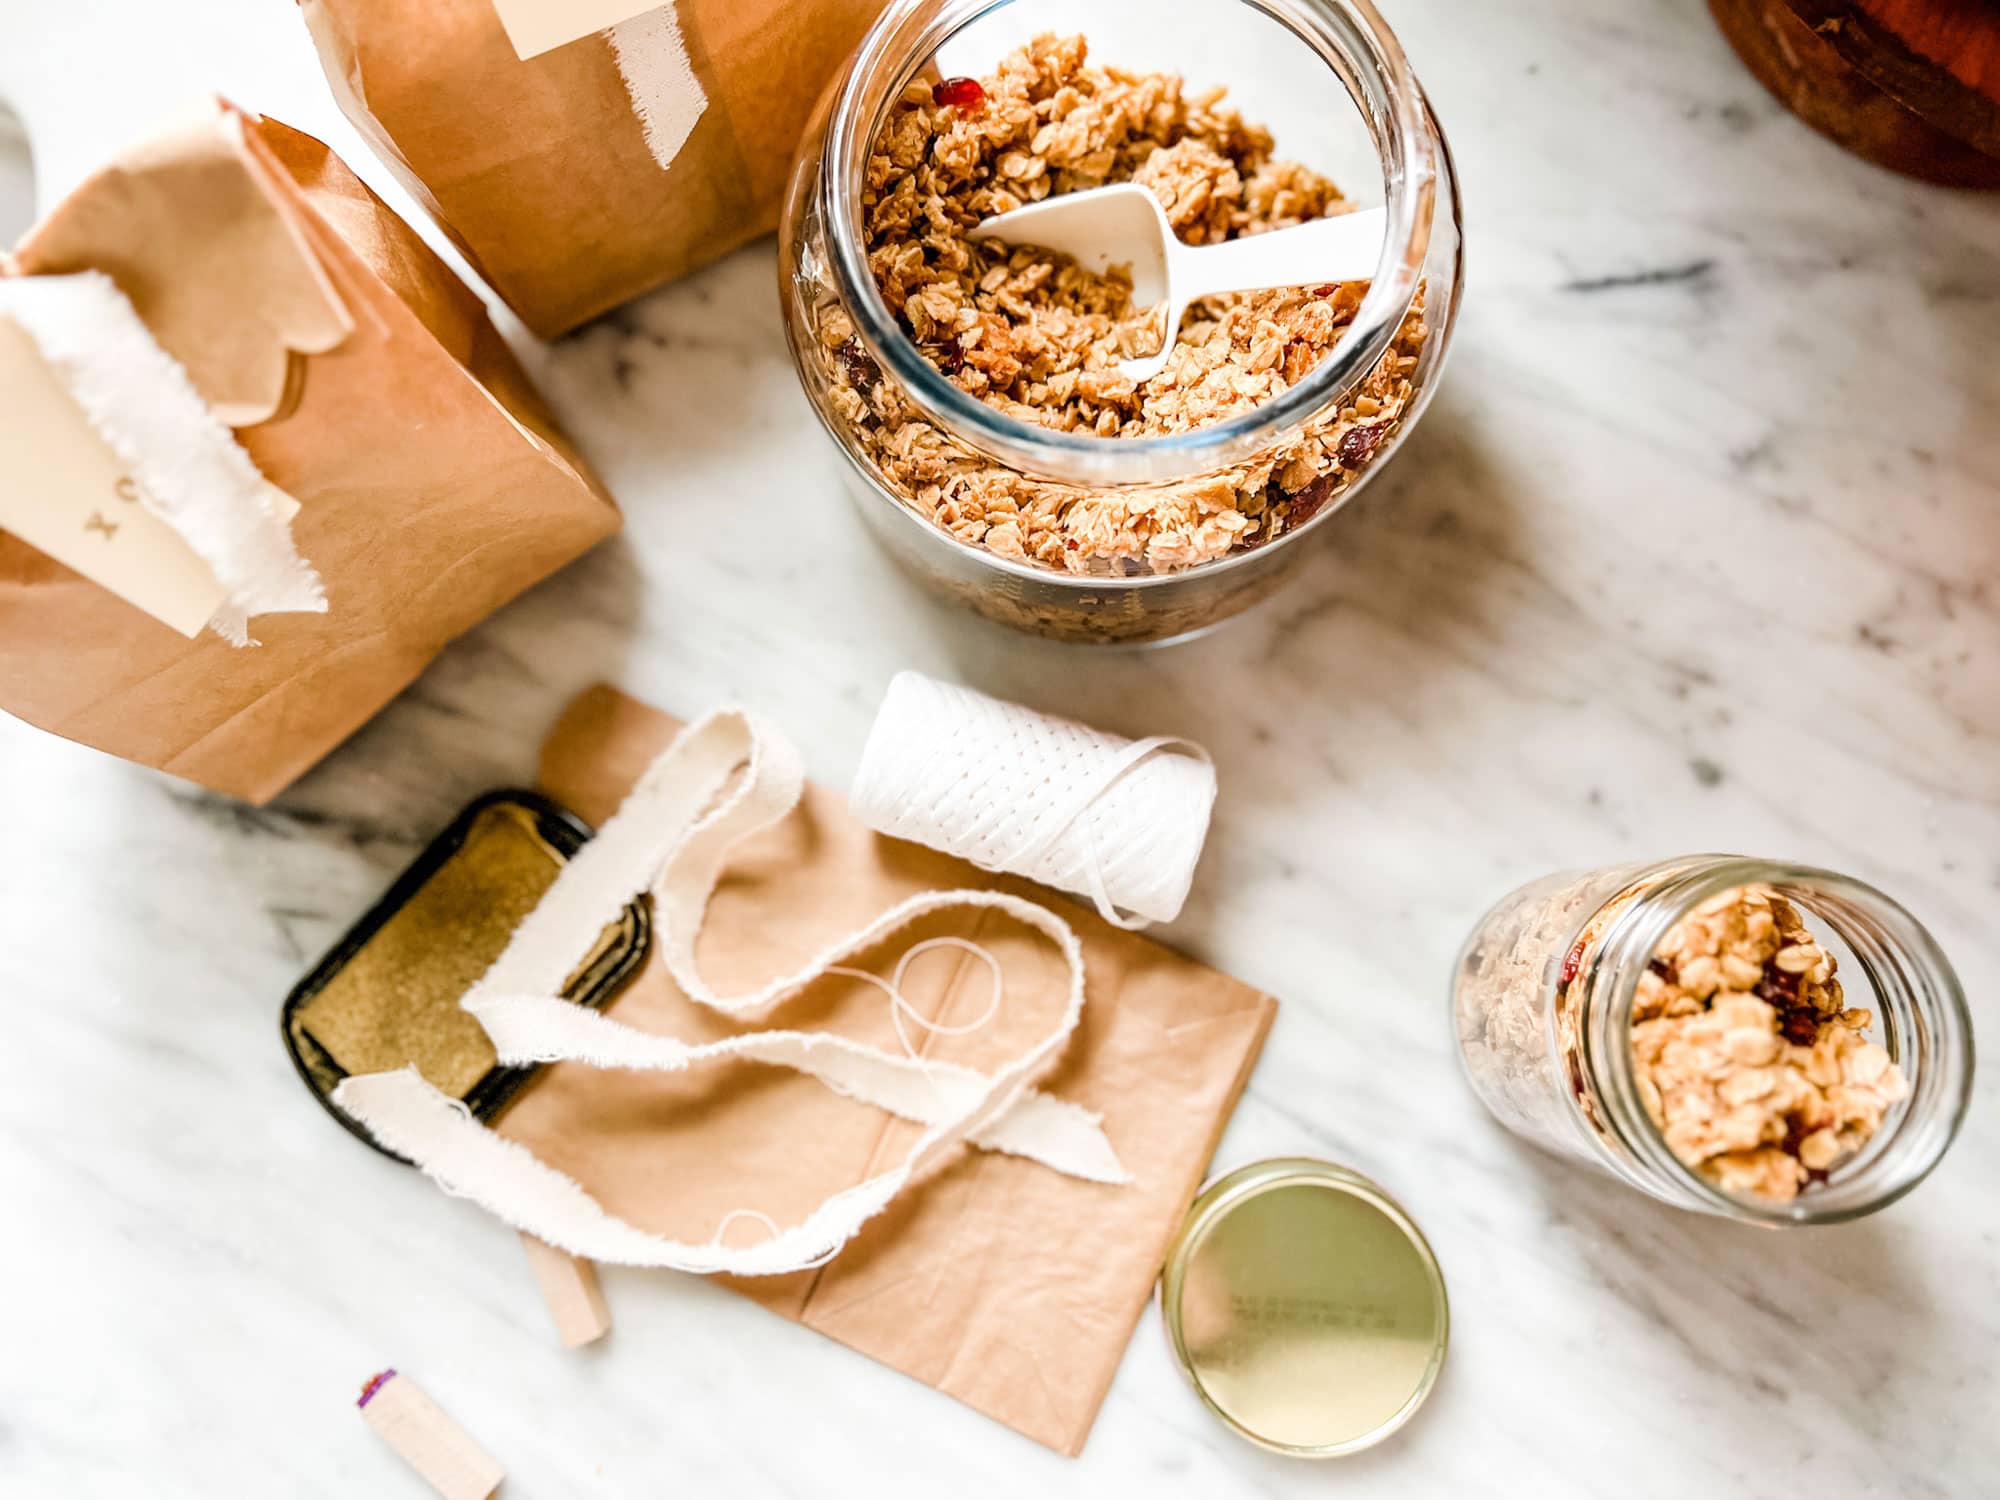 https://mostlovelythings.com/wp-content/uploads/2022/12/granola-in-jars-and-bags.jpg